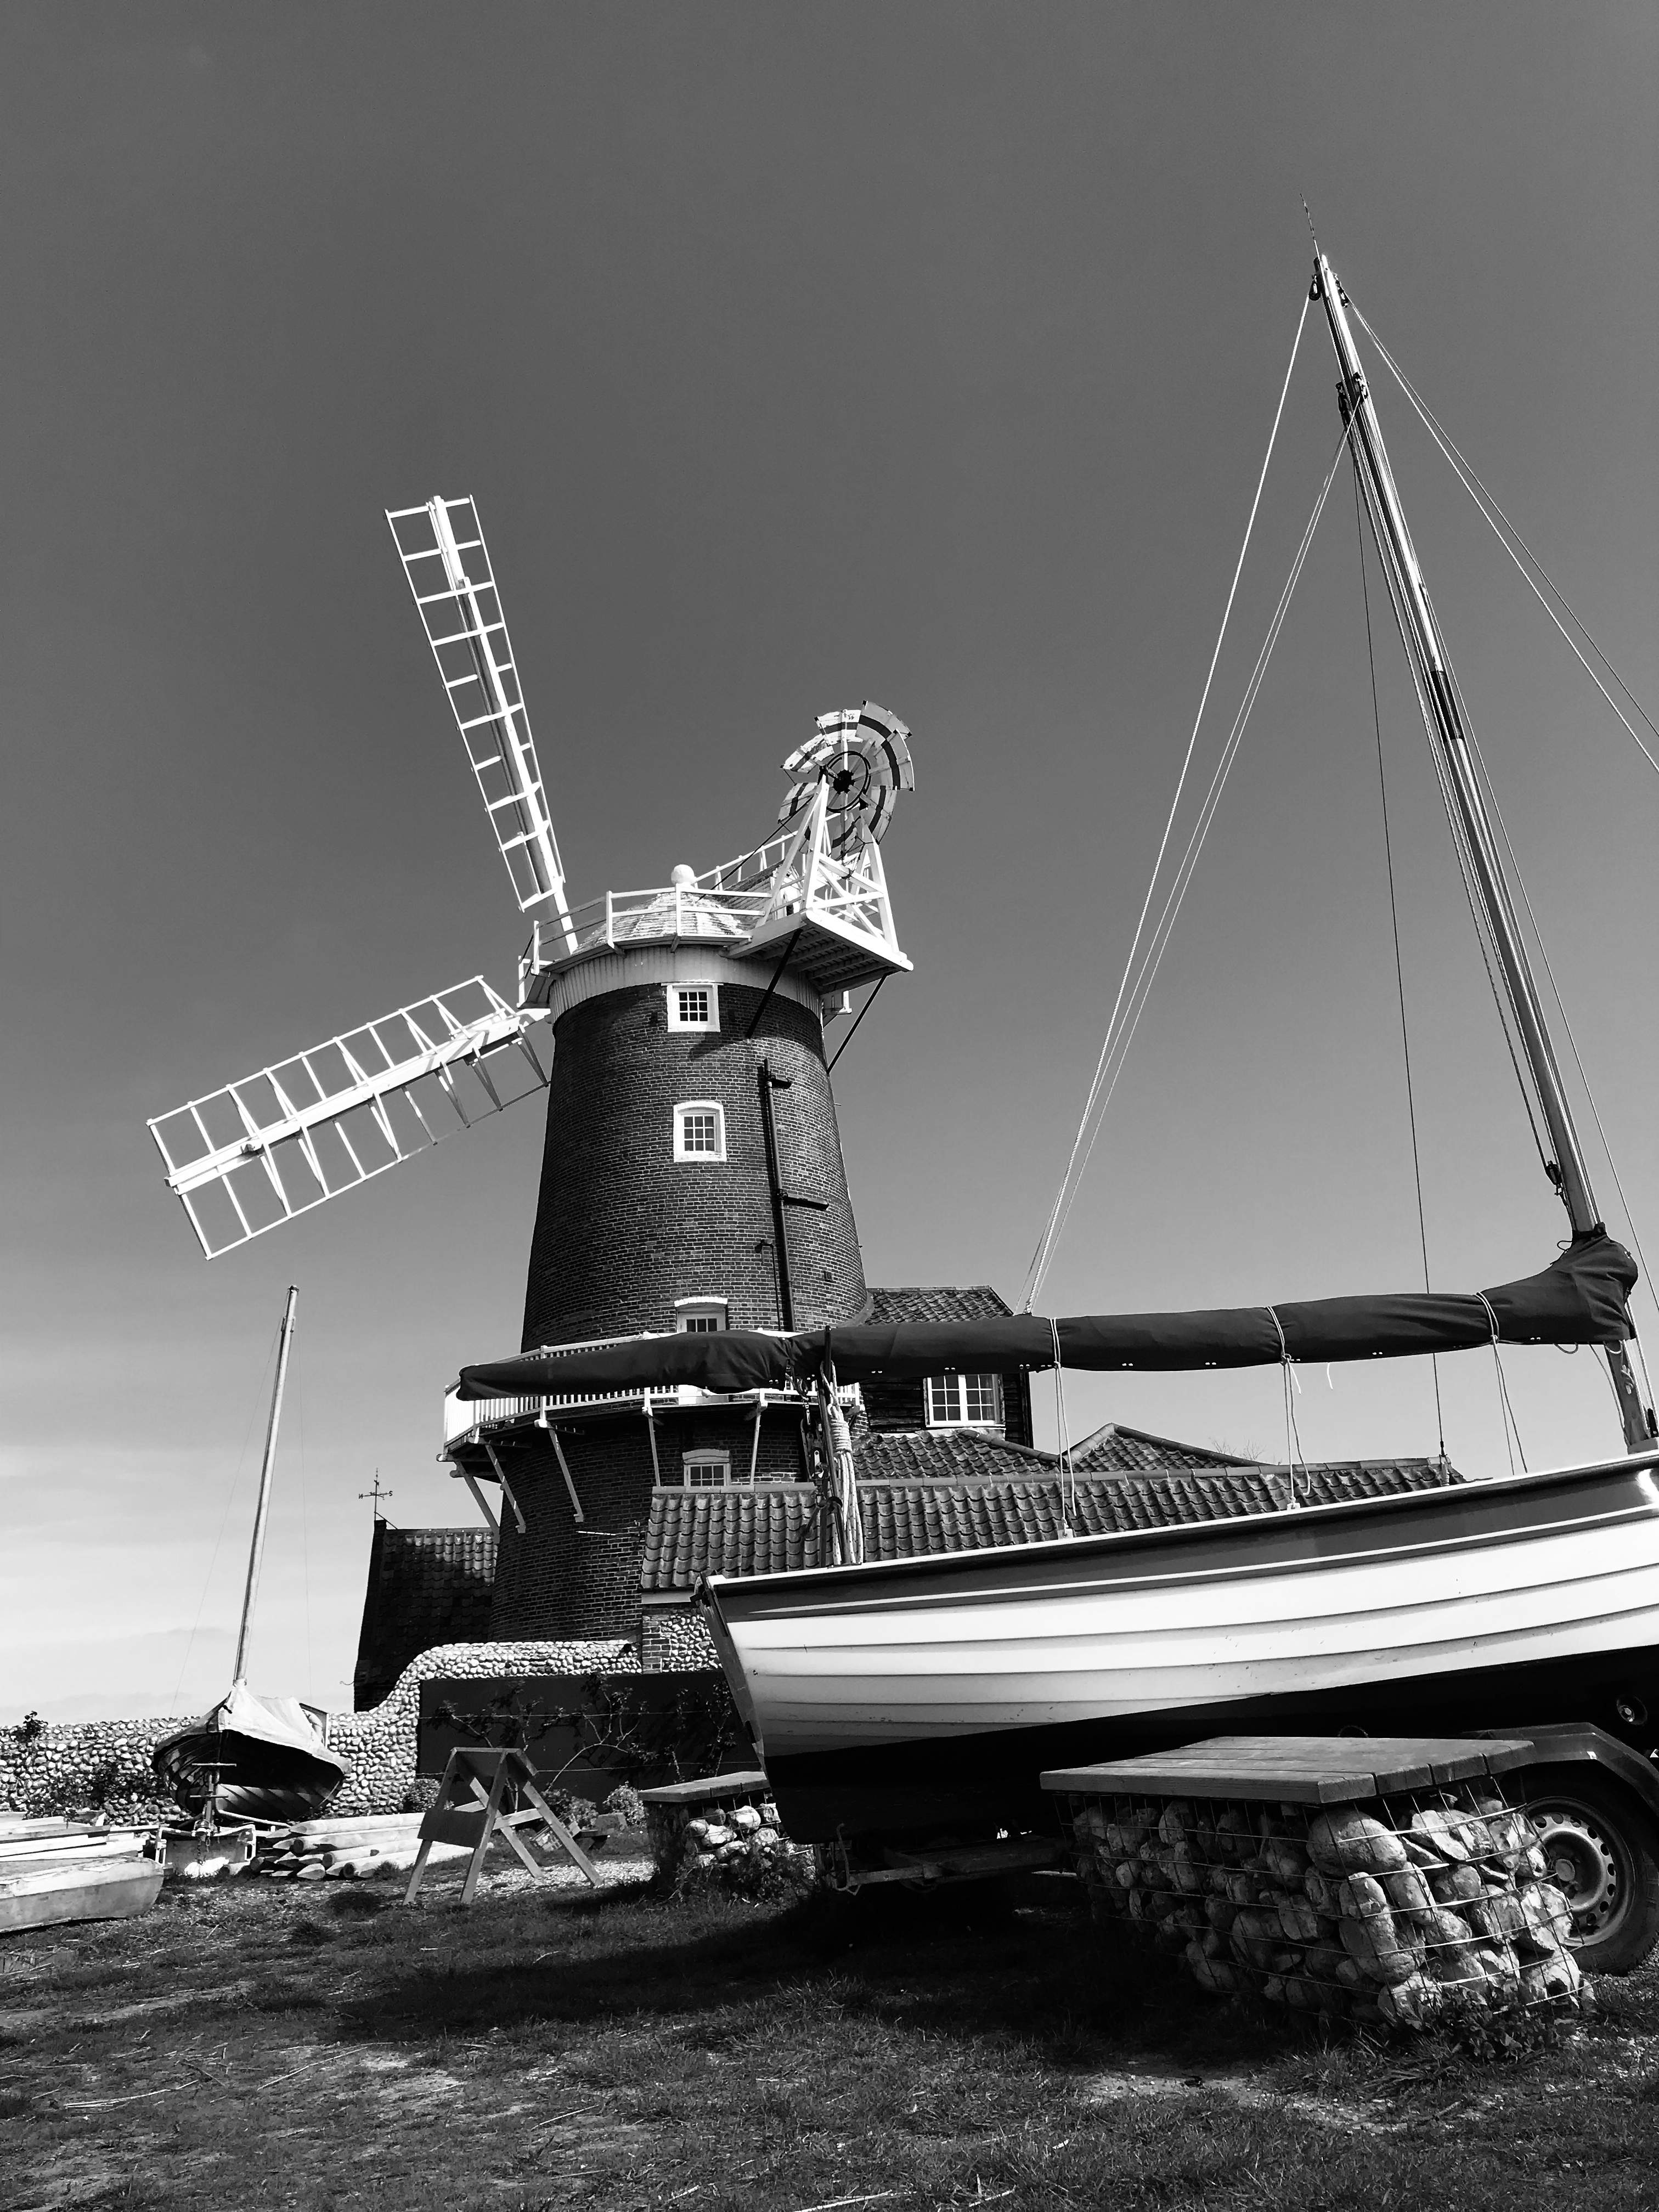 Cley Windmill at Cley Next the Sea, Norfolk, UK